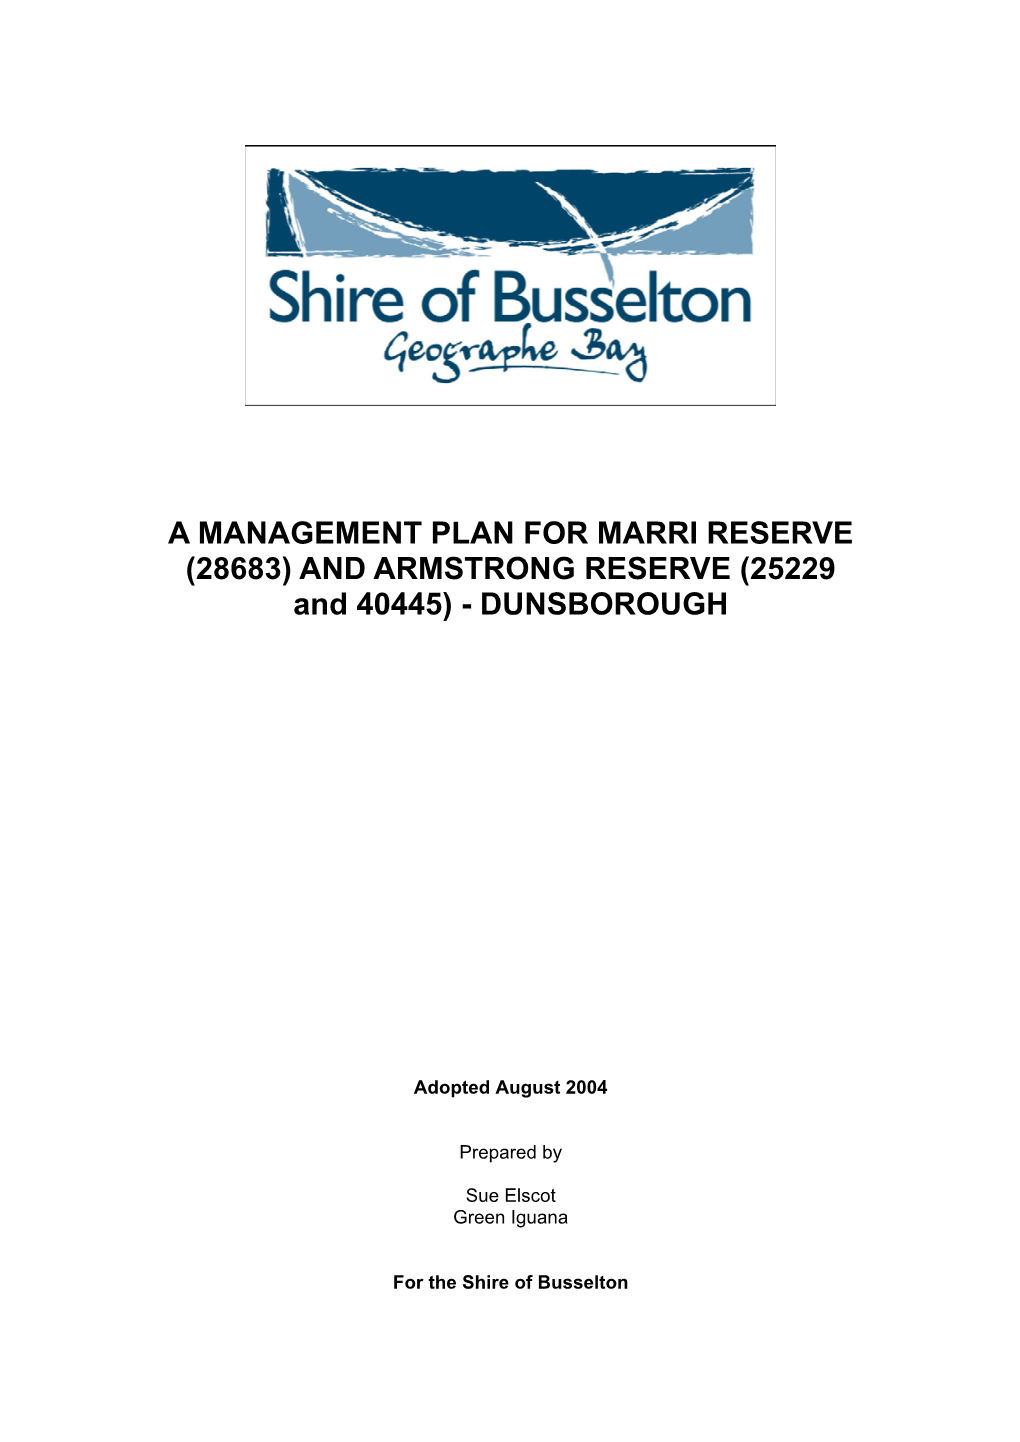 A MANAGEMENT PLAN for MARRI RESERVE (28683) and ARMSTRONG RESERVE (25229 and 40445) - DUNSBOROUGH